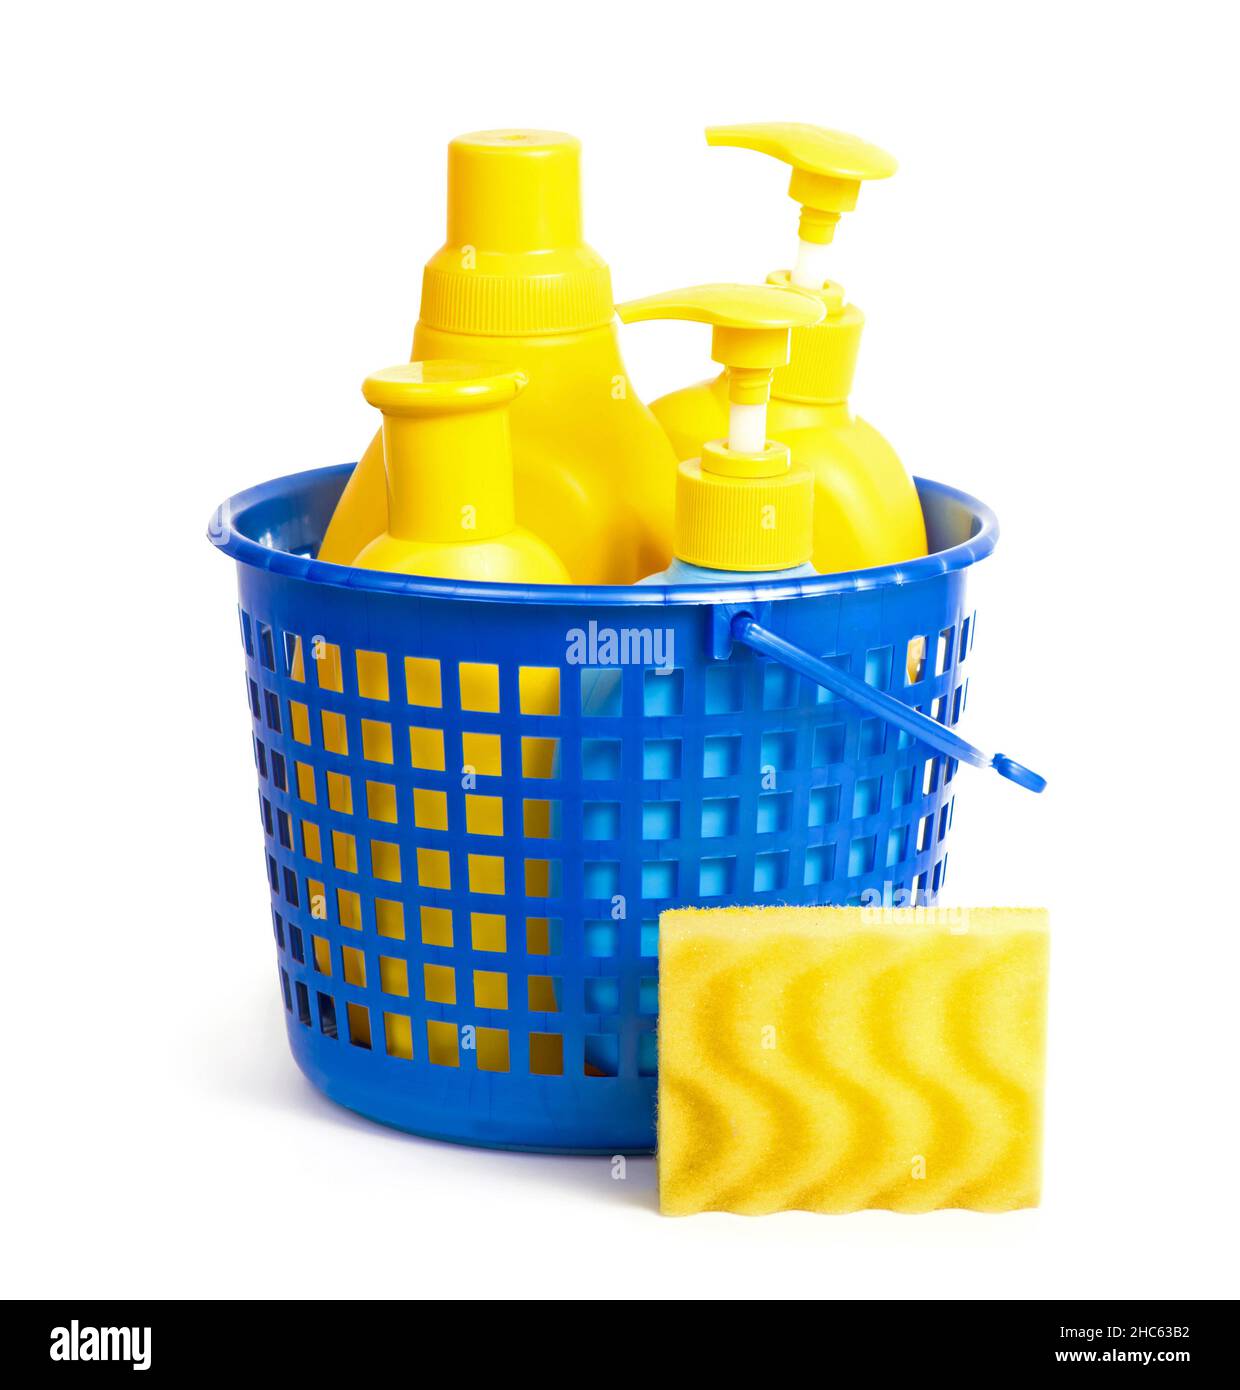 https://c8.alamy.com/comp/2HC63B2/household-cleaning-products-and-accessories-in-basket-with-detergent-spay-and-rubber-gloves-2HC63B2.jpg